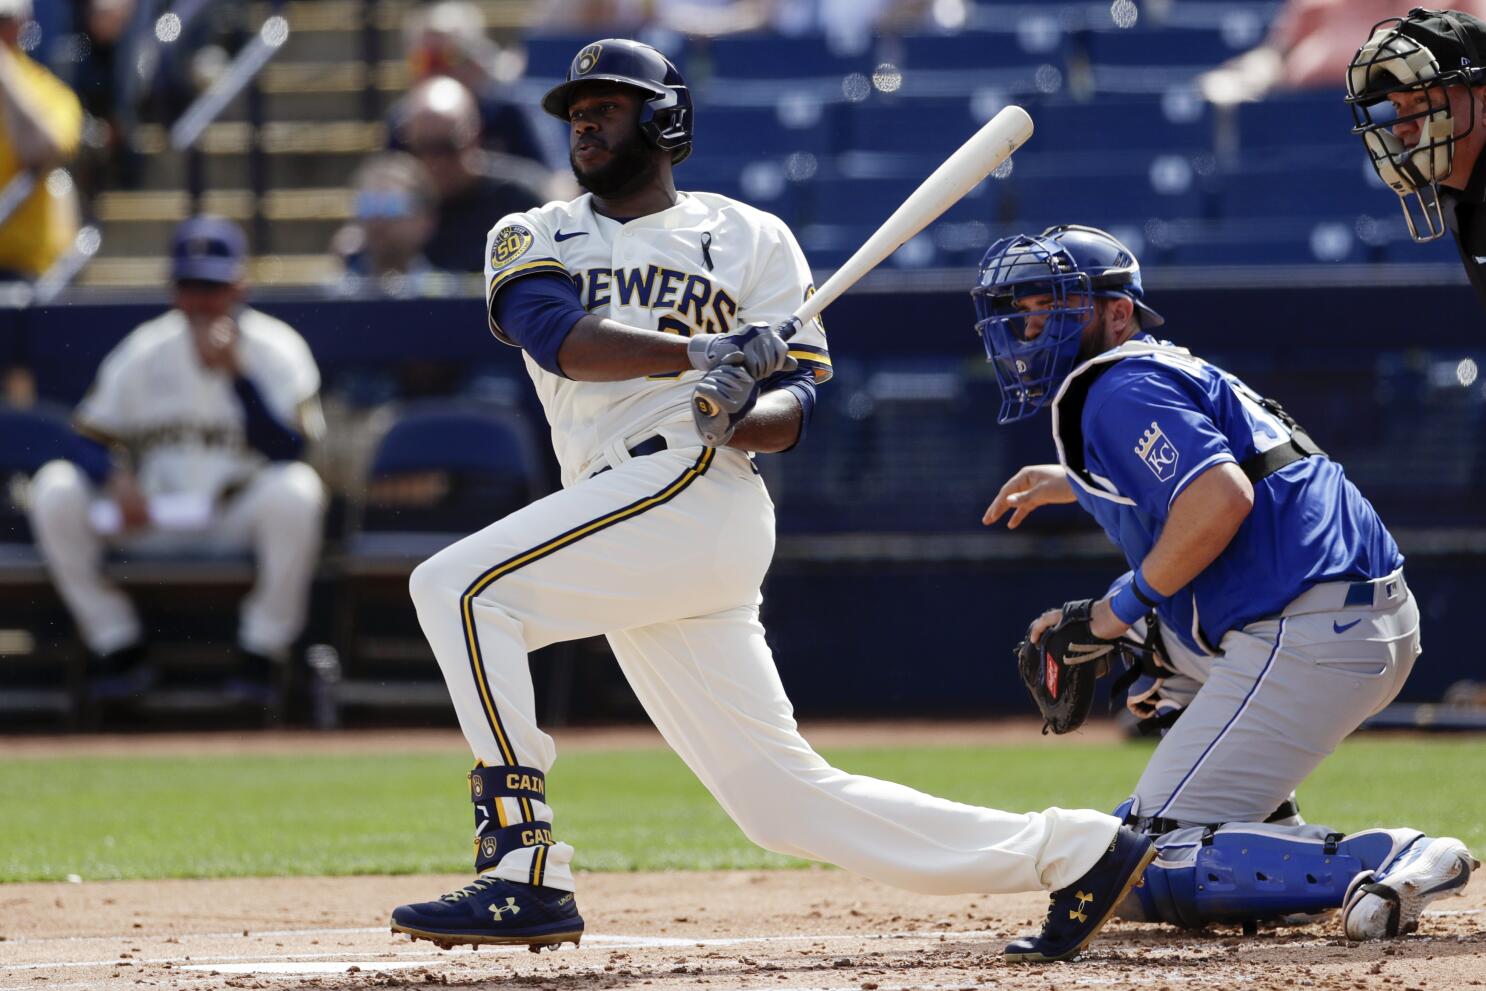 When healthy, Lorenzo Cain remains a quality contributor for the